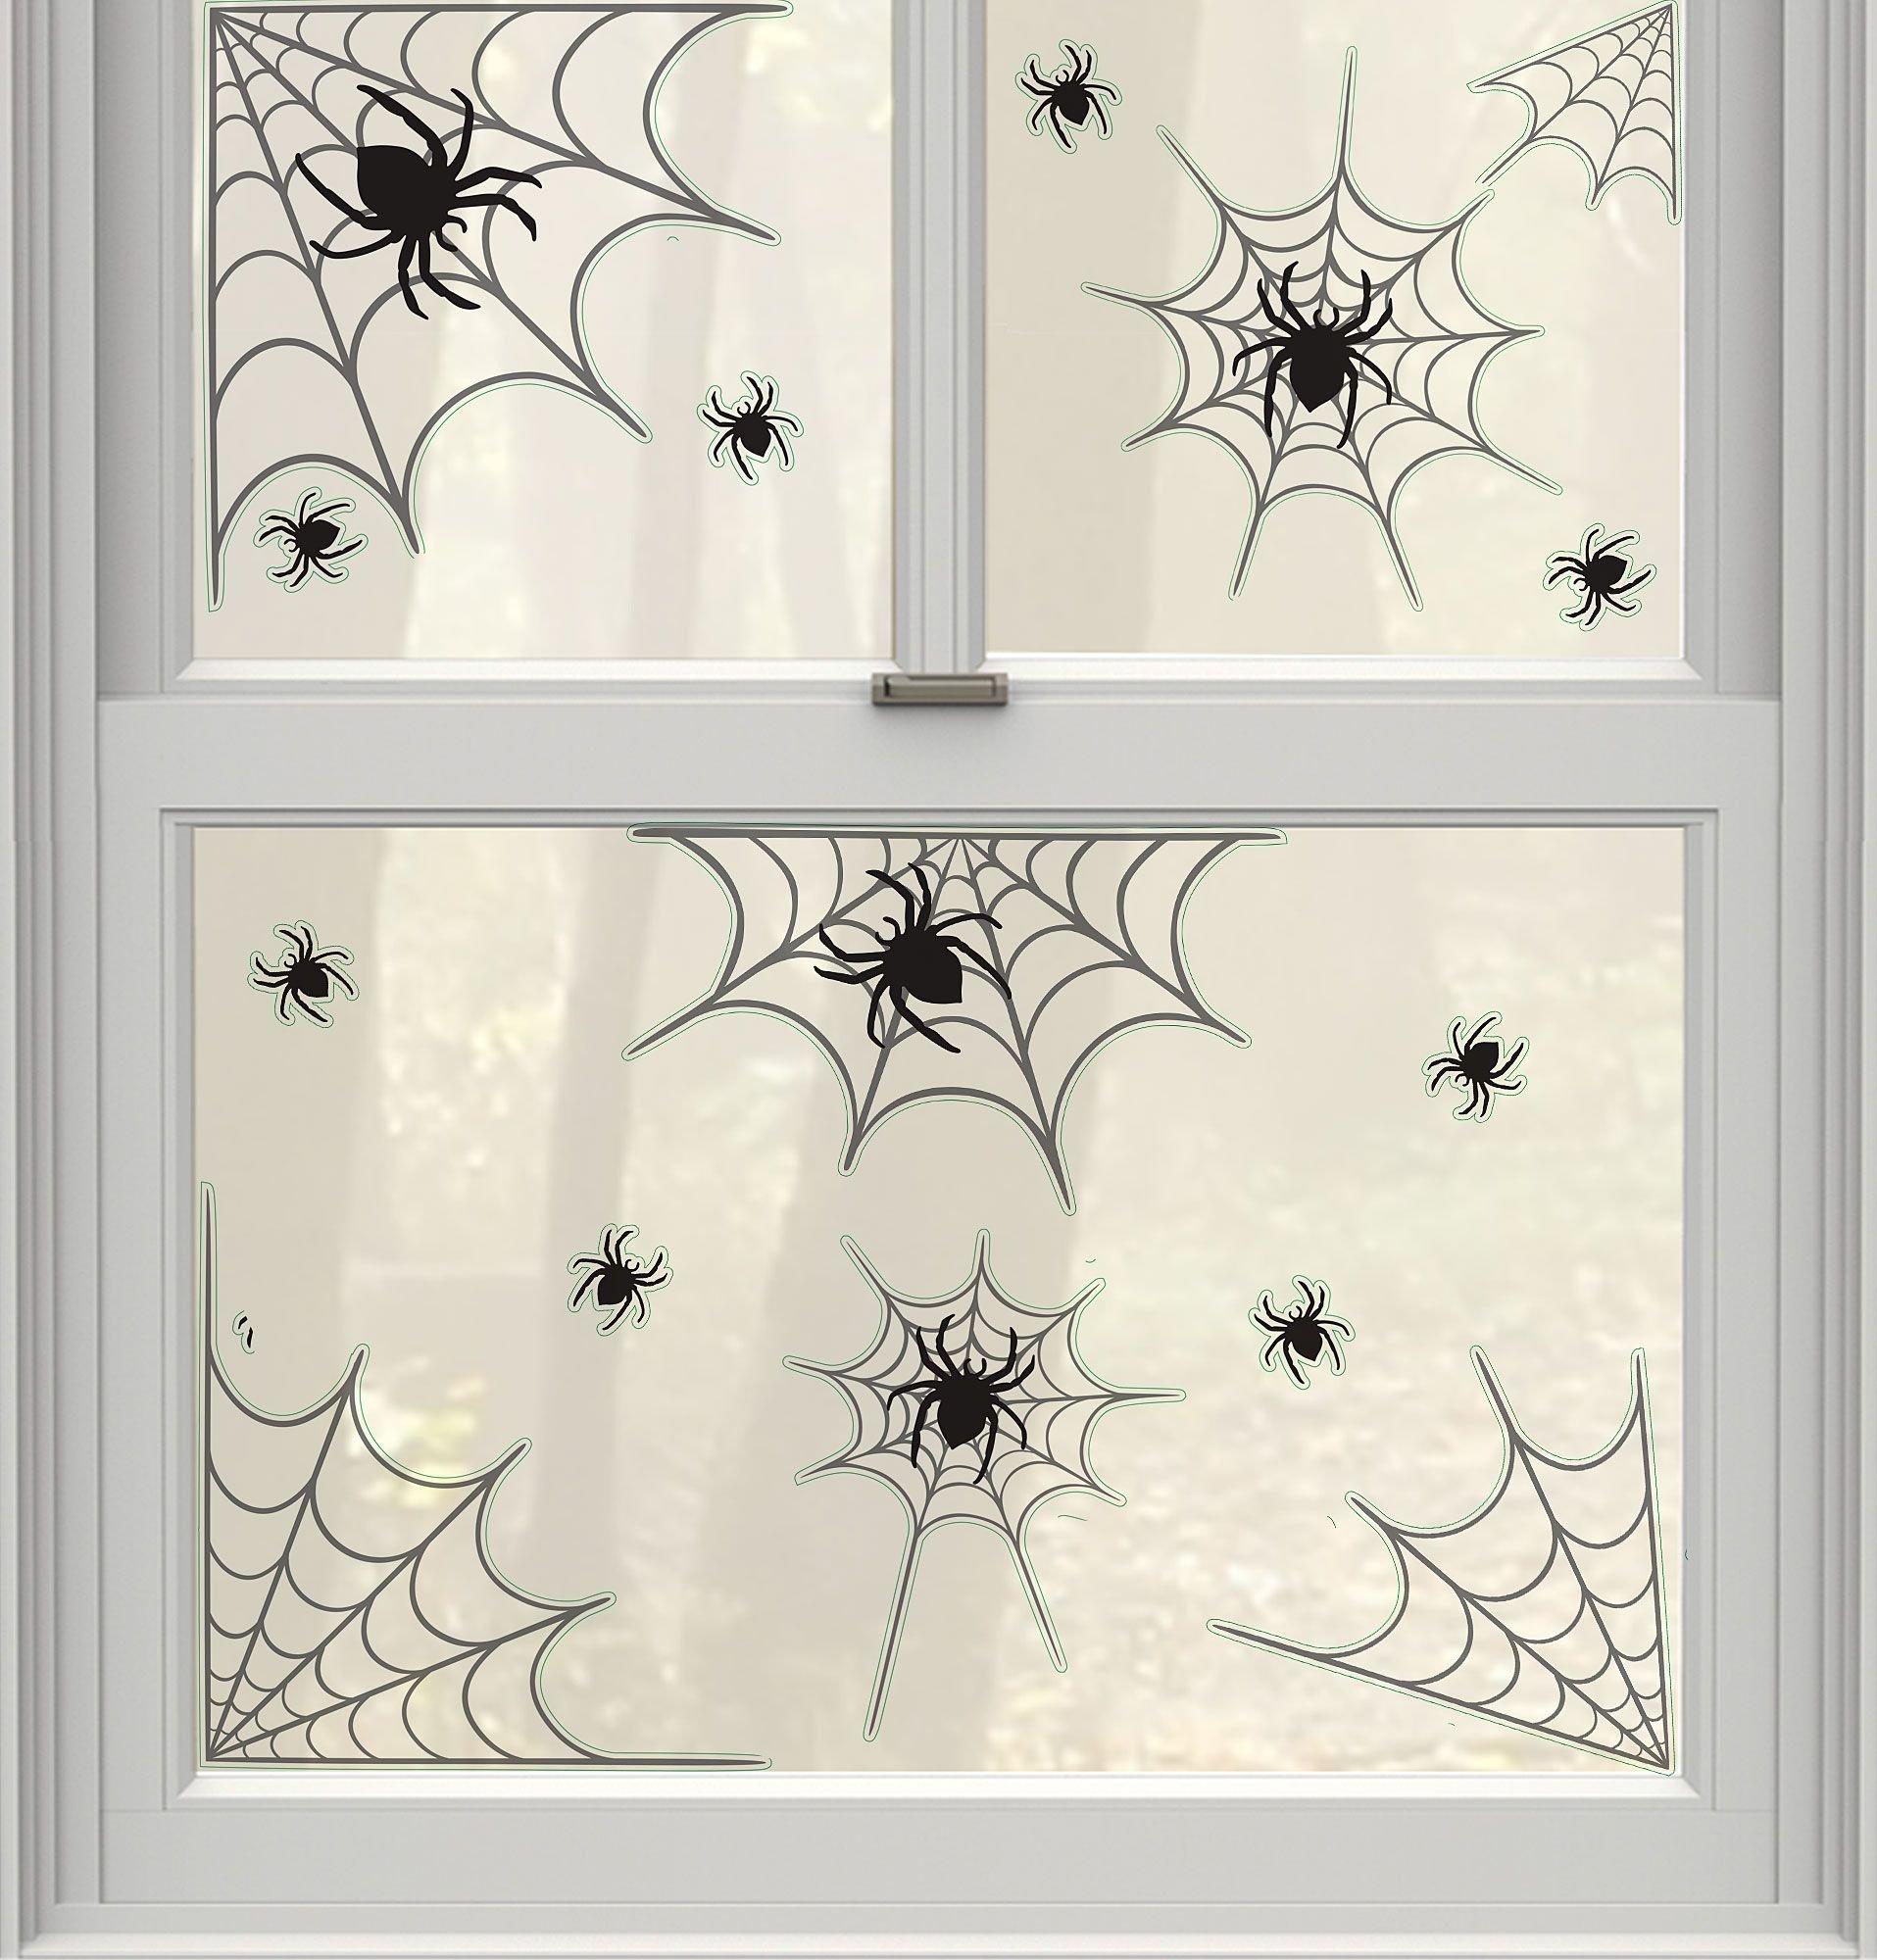 Spider Webs Cling Decals 14ct